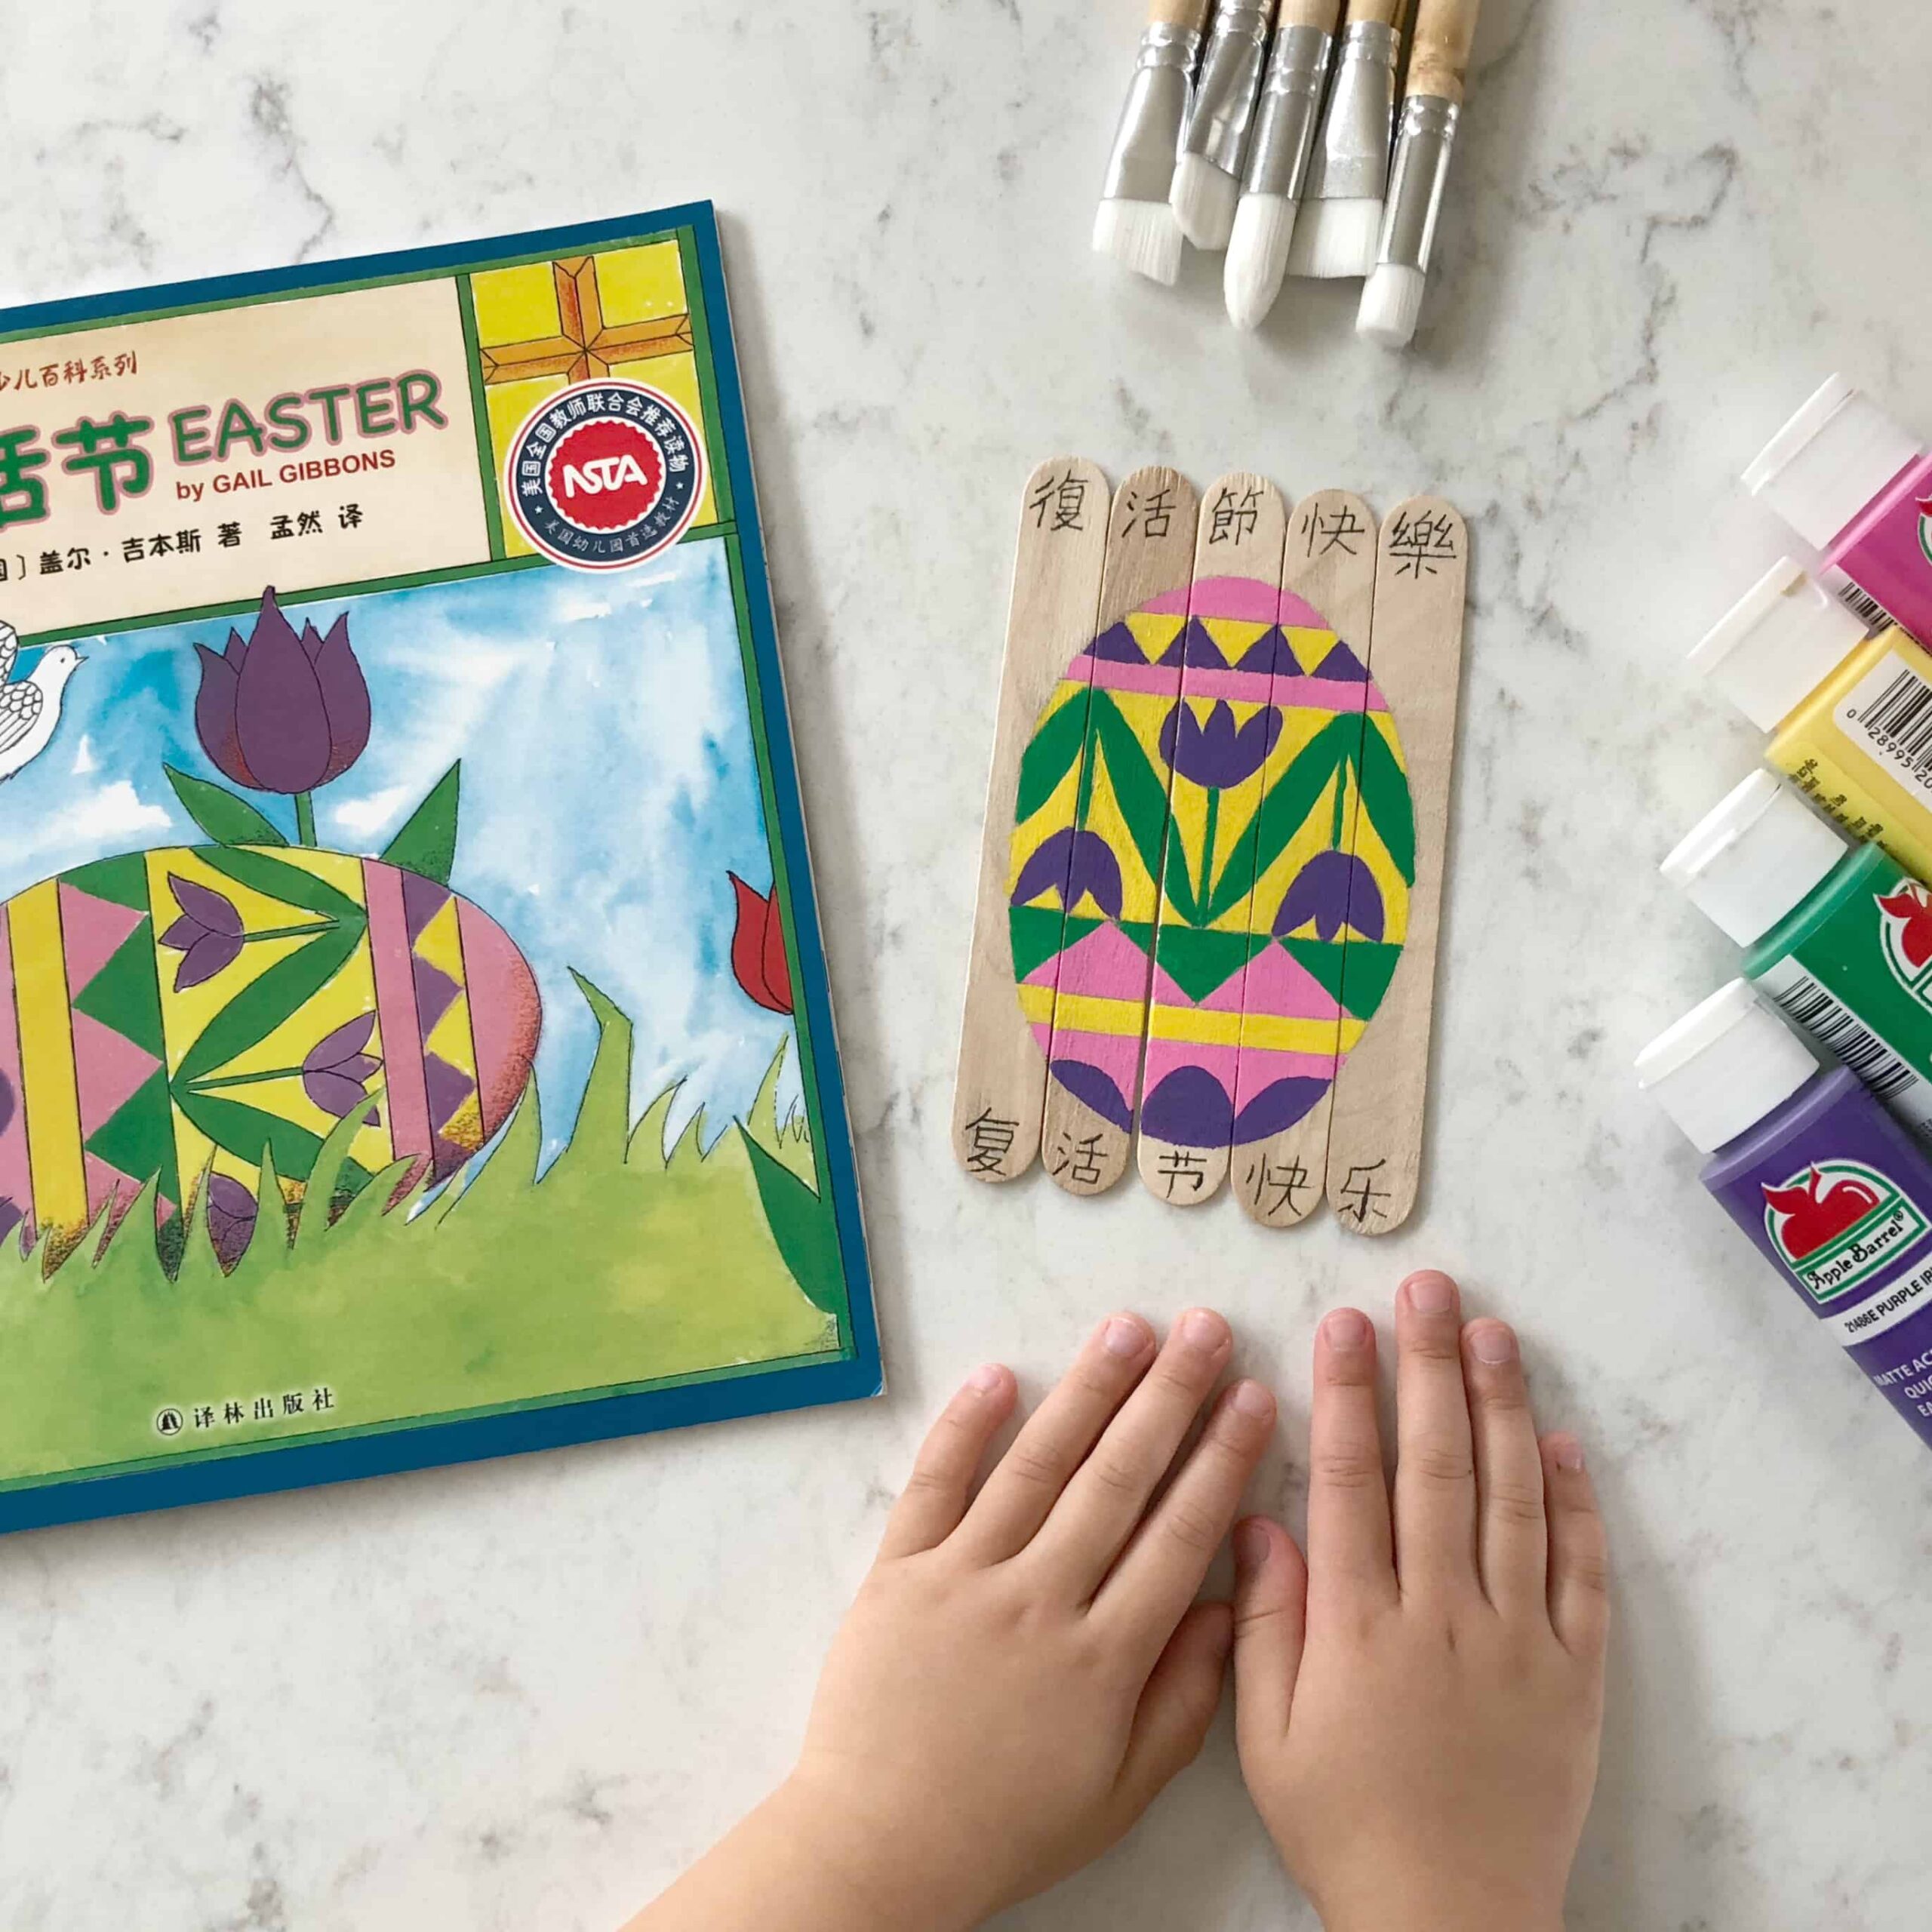 How to Celebrate Easter in Chinese: Kids Books, Videos, Activities